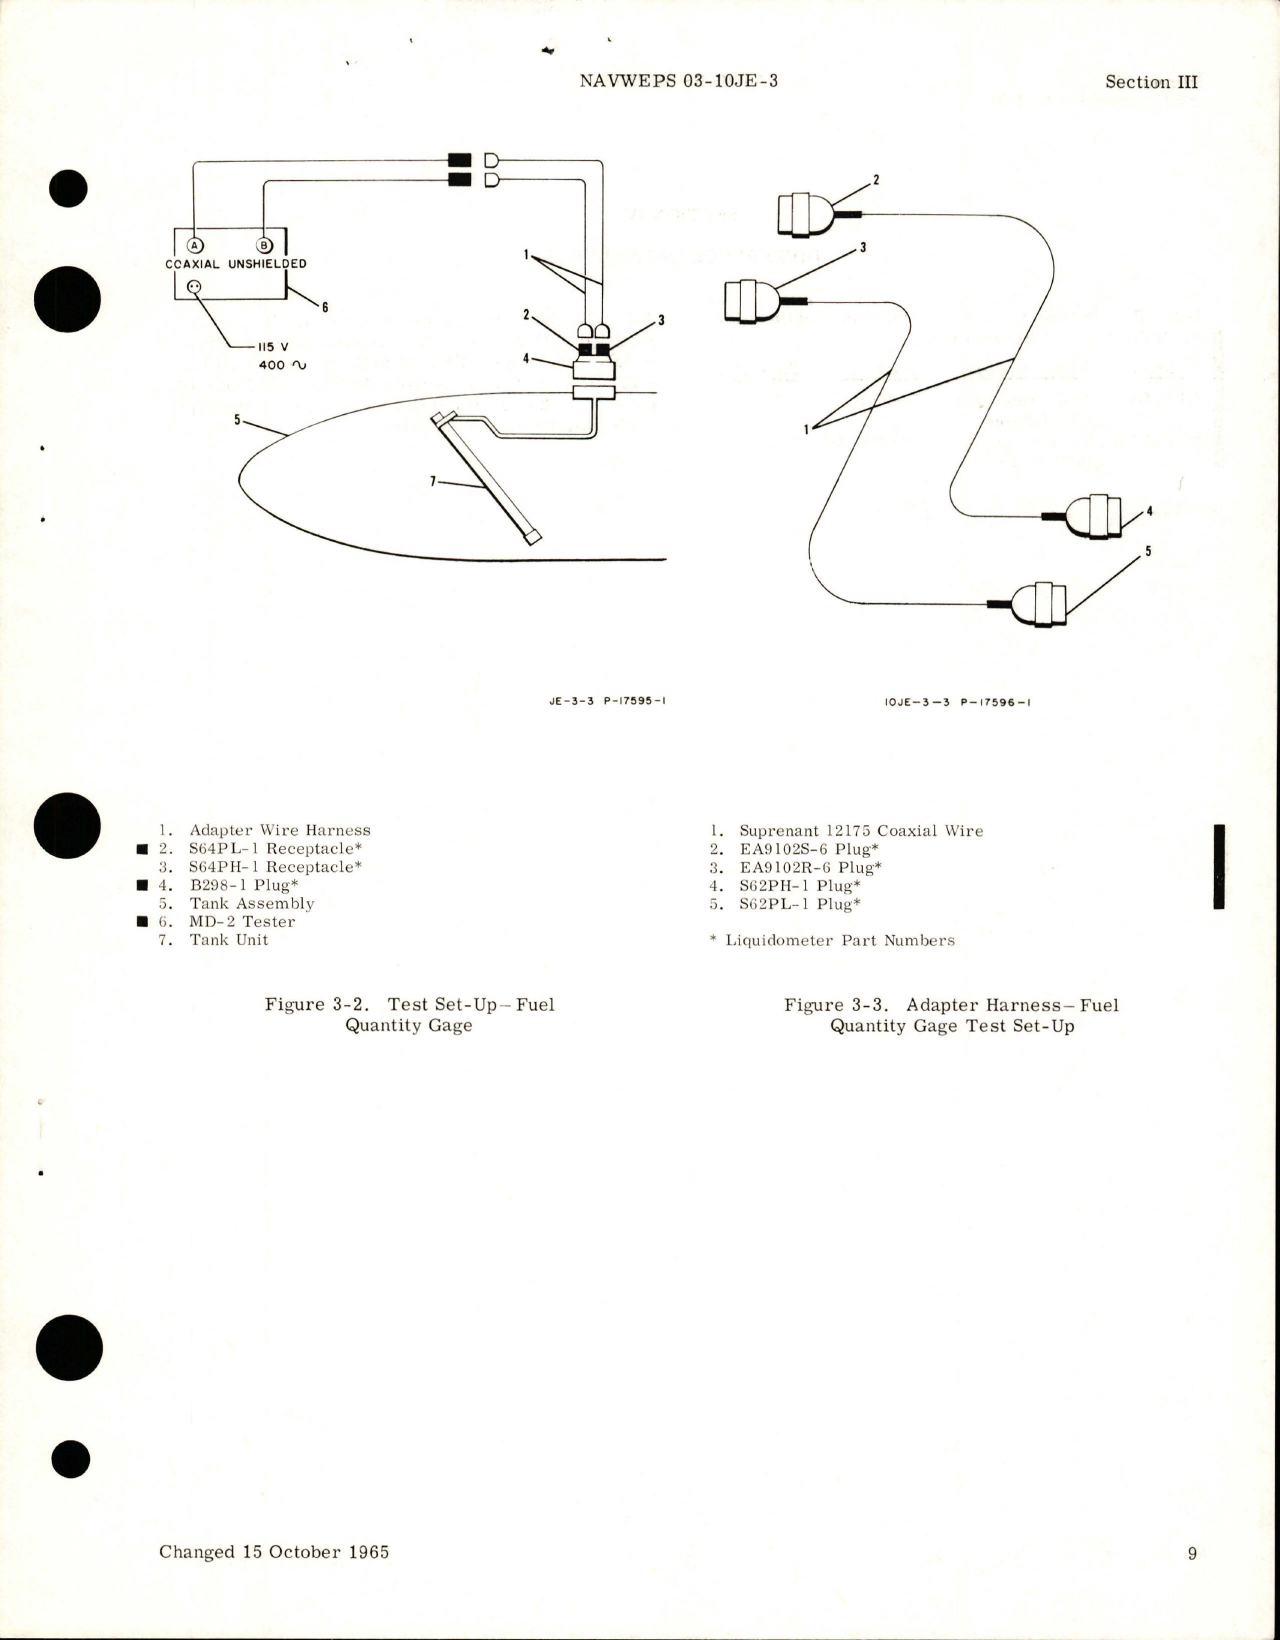 Sample page 7 from AirCorps Library document: Overhaul Instructions for Fuel Tank Assembly - 400 Gallon - Parts 5556400, 5556400-501, and 5556400-503